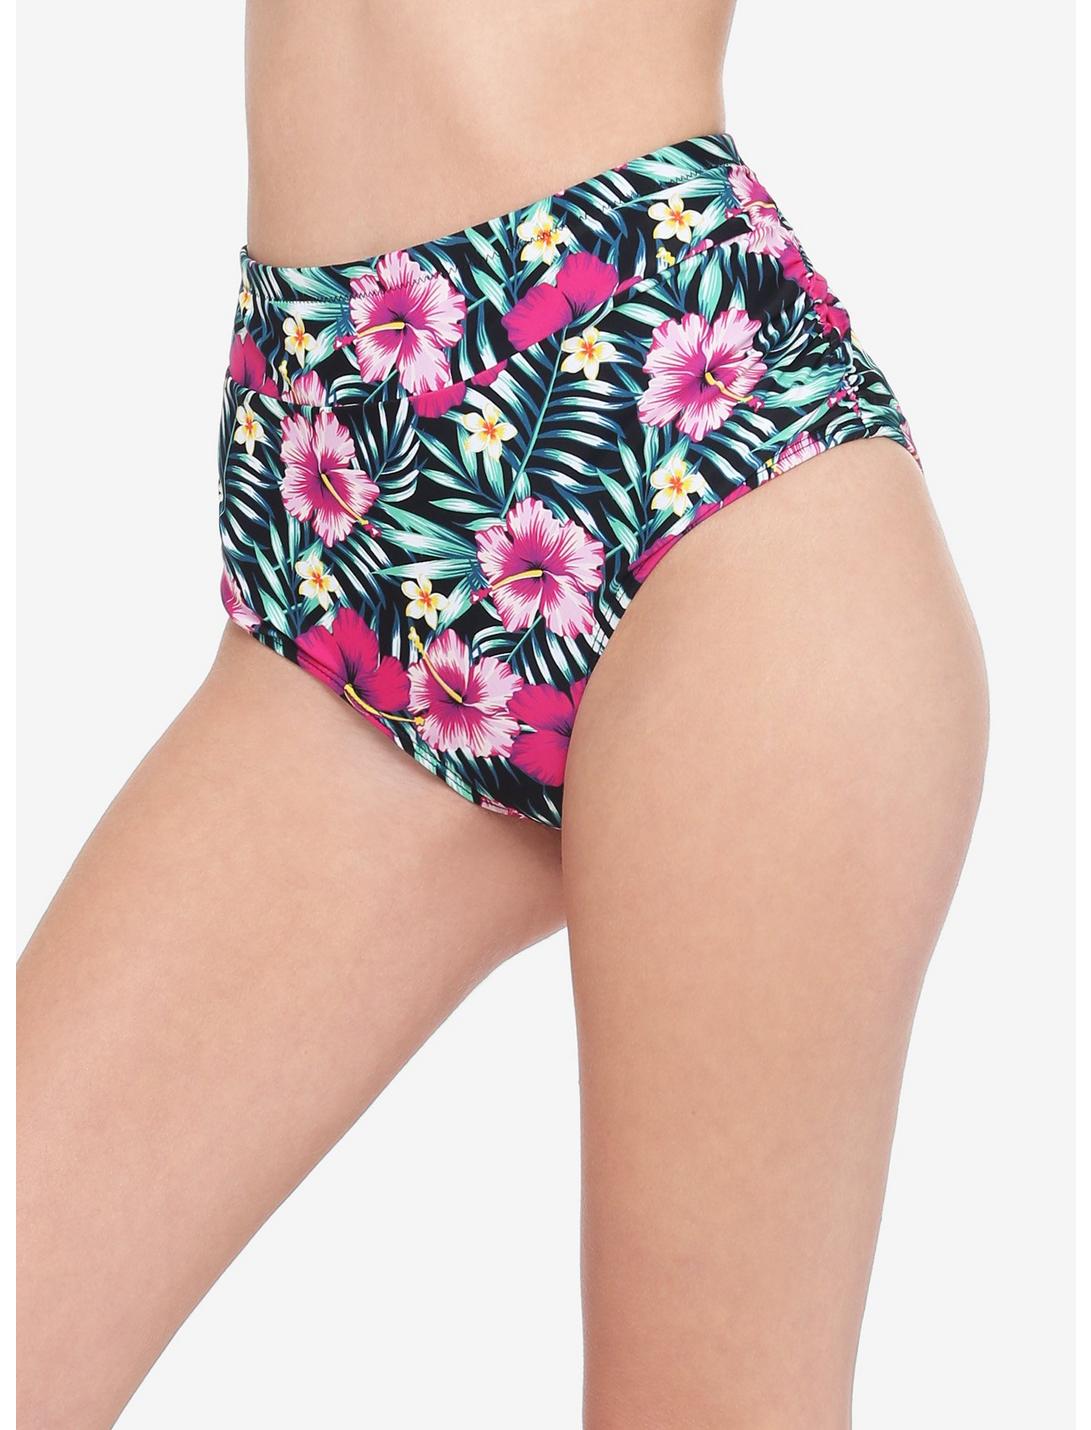 Pink Tropical Floral High-Waisted Swim Bottoms, MULTI, hi-res